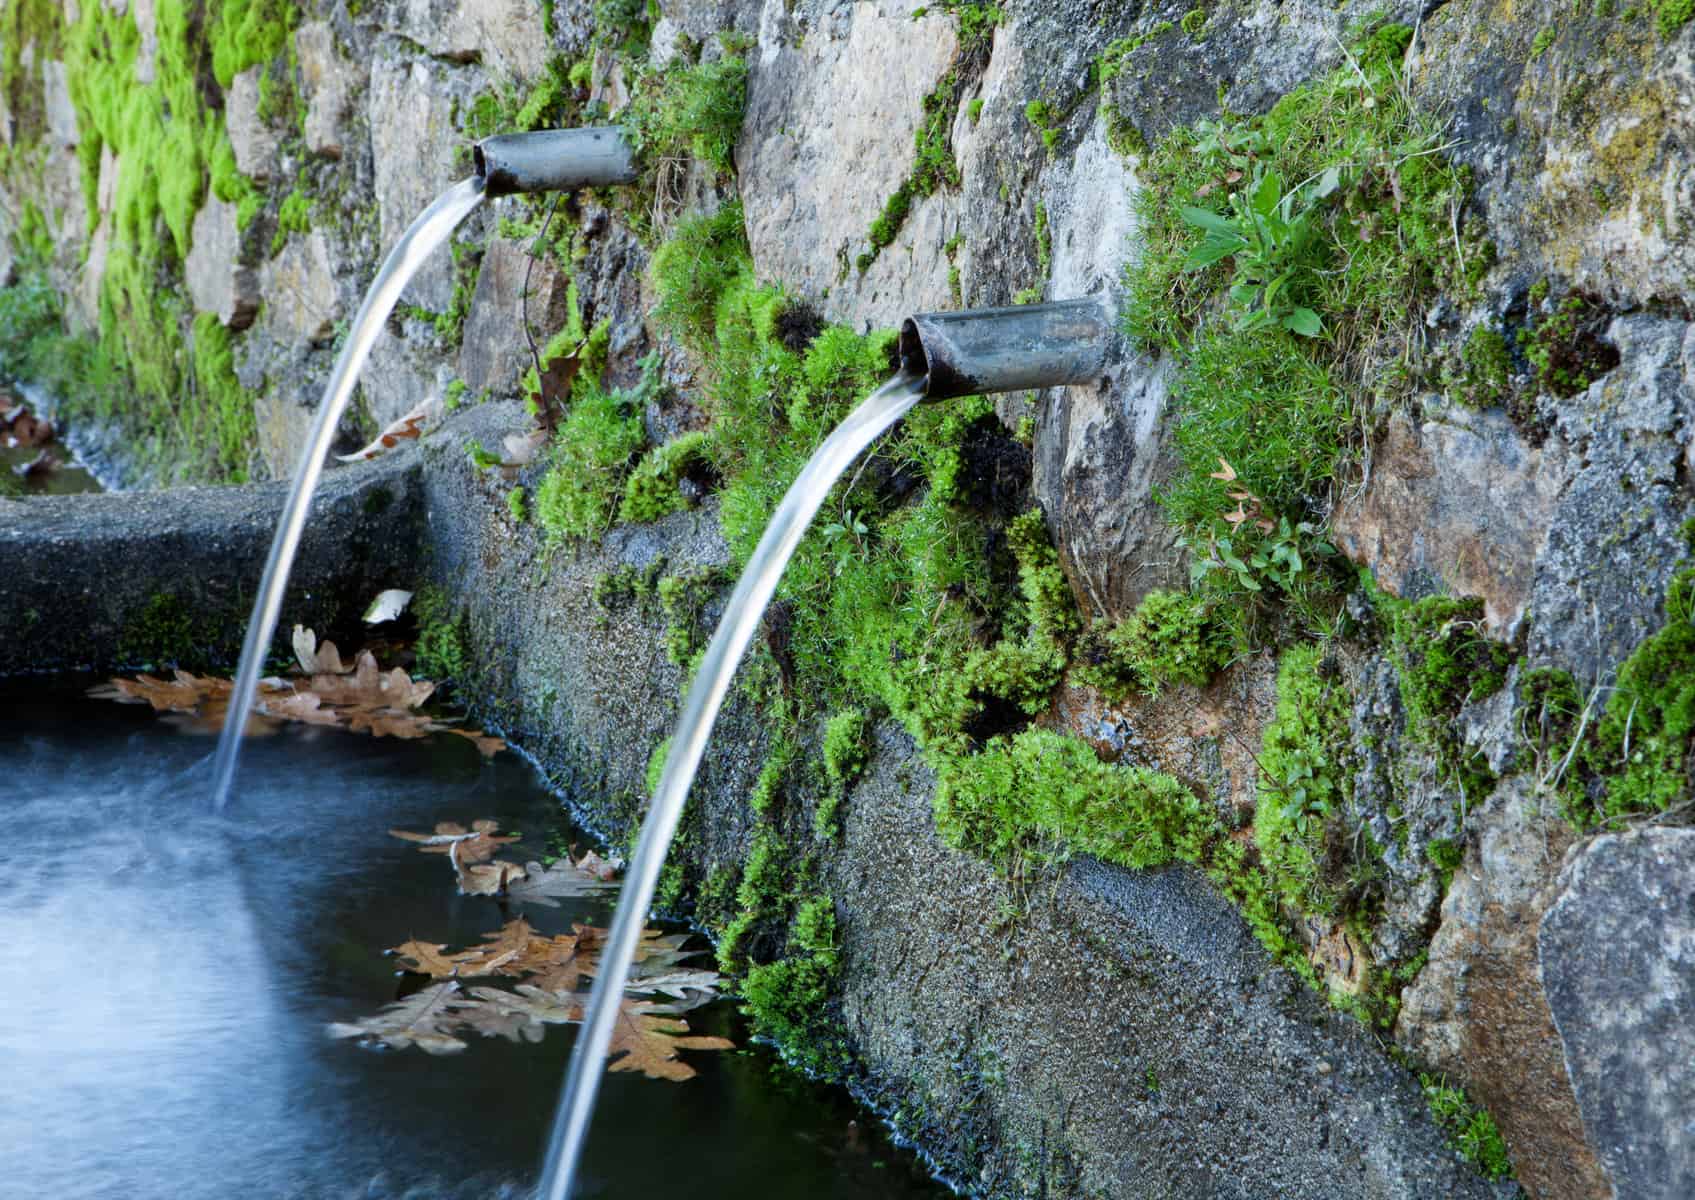 water pouring out of a natural water source surrounding by rocks and moss